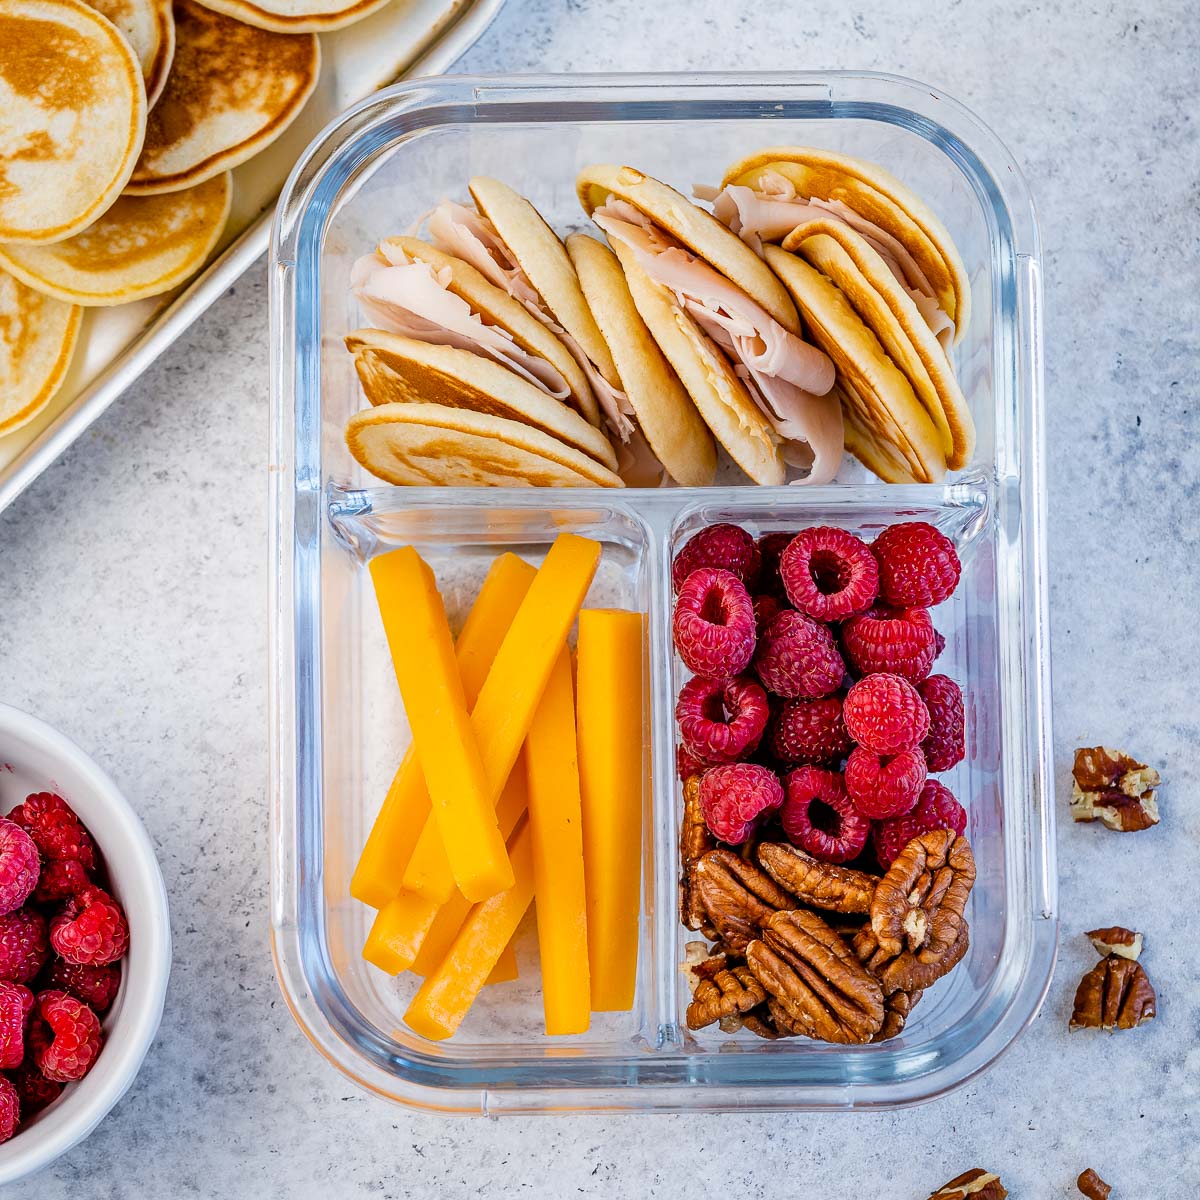 https://cleanfoodcrush.com/wp-content/uploads/2022/02/clean-eating-Silver-Dollar-Pancake-Lunchbox-CFC-Cold-Lunchbox-Series.jpg